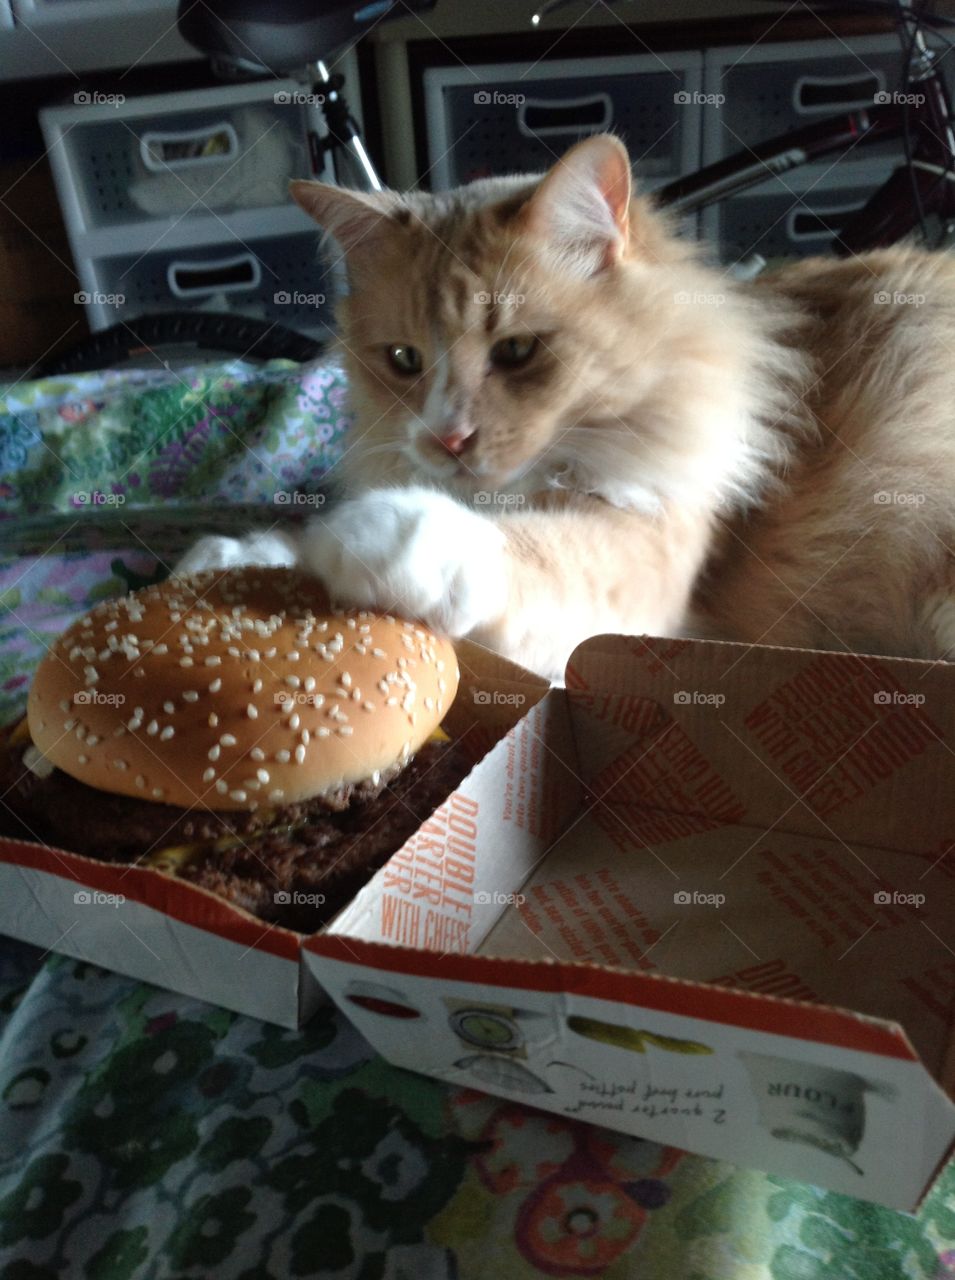 Cat intently claiming a cheeseburger